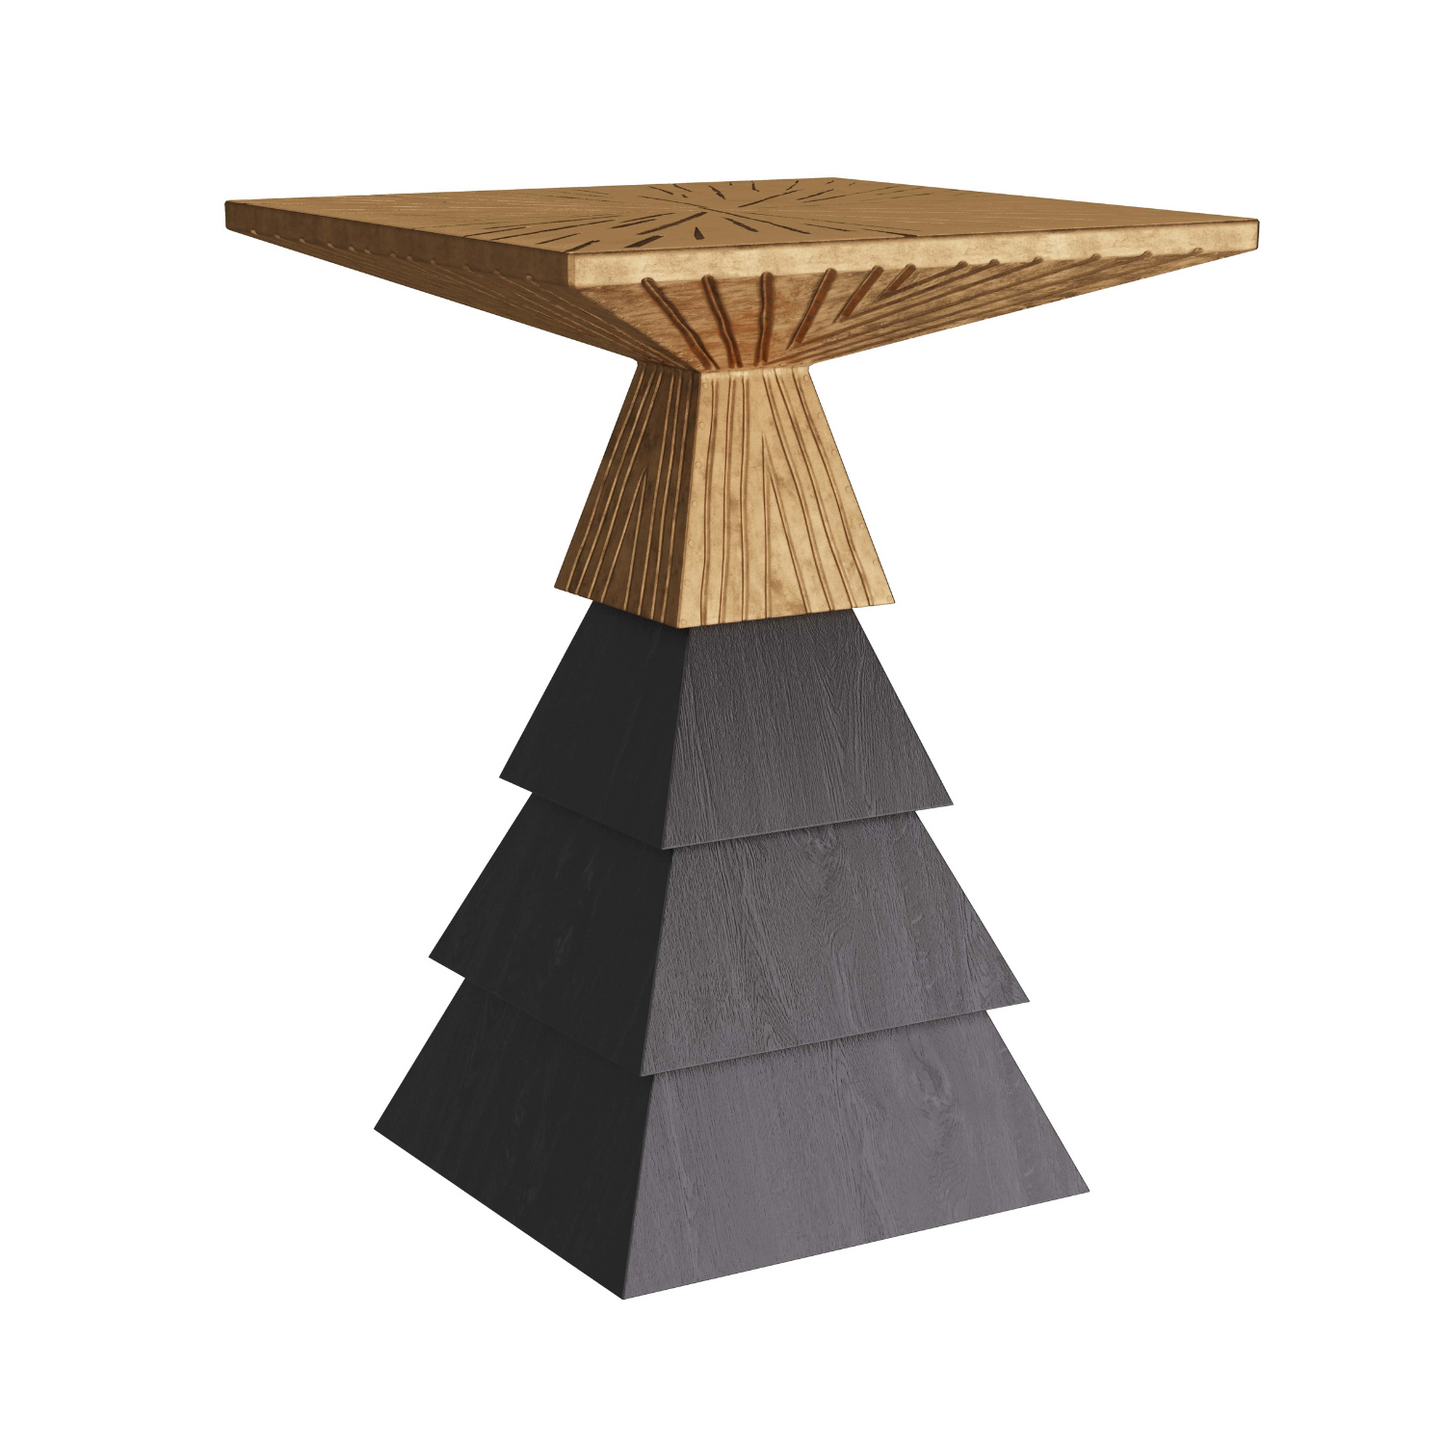 Mesopotamian Elegance - Wanetta Accent Table in Ebony Mango Wood and Antique Brass